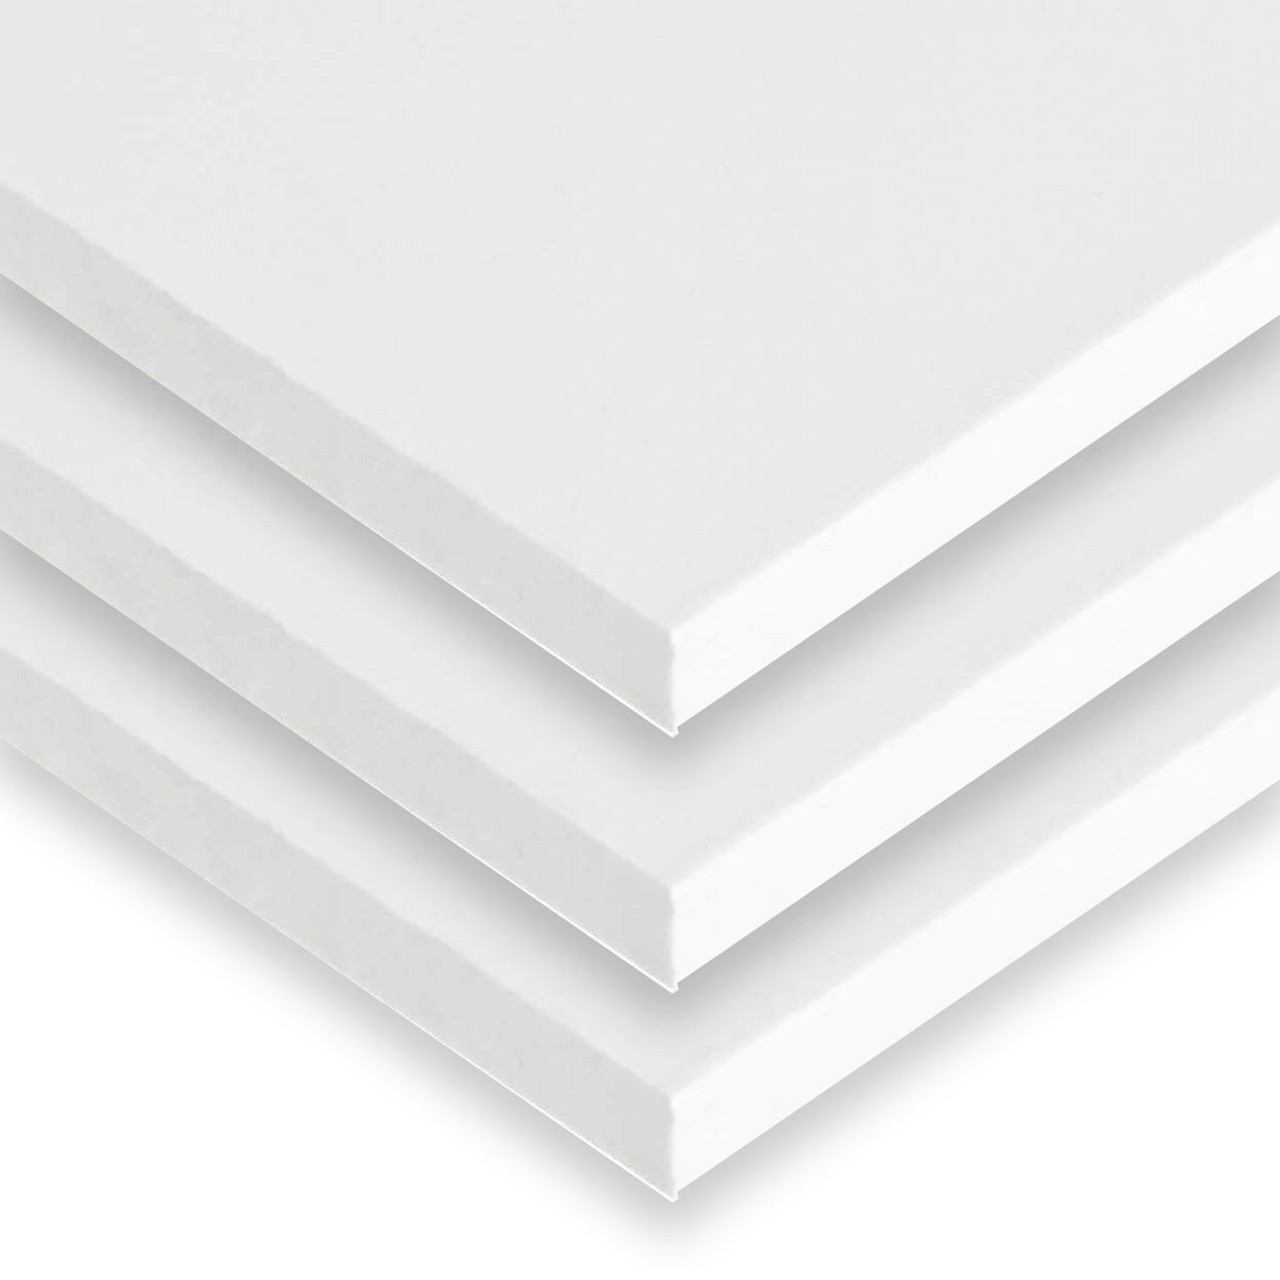 0.472 (1/2 inch) x 24" x 24" (3 Pack), PVC Expanded Plastic Sheet, White